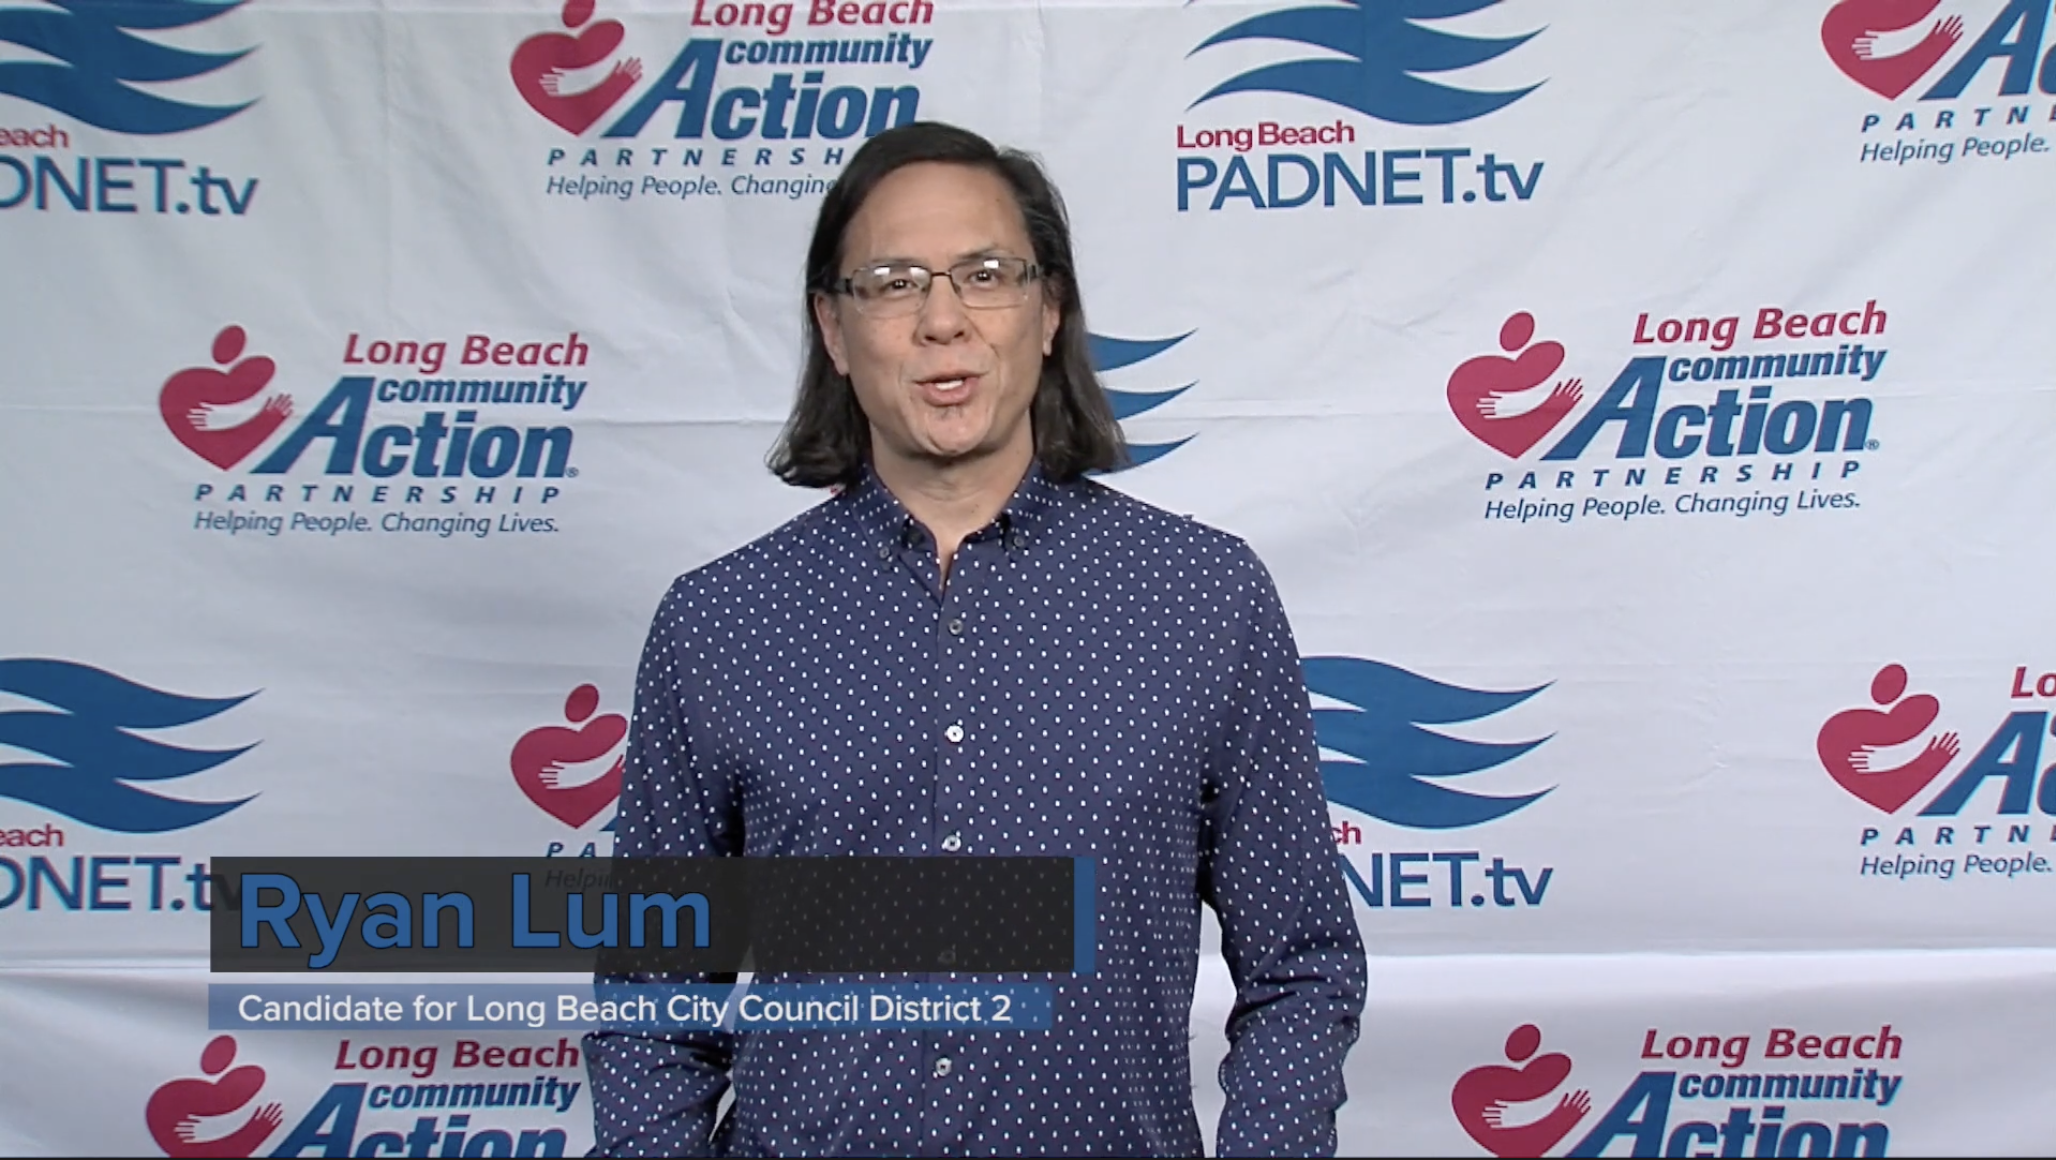 Ryan Lum Featured on Padnet TV for Campaign